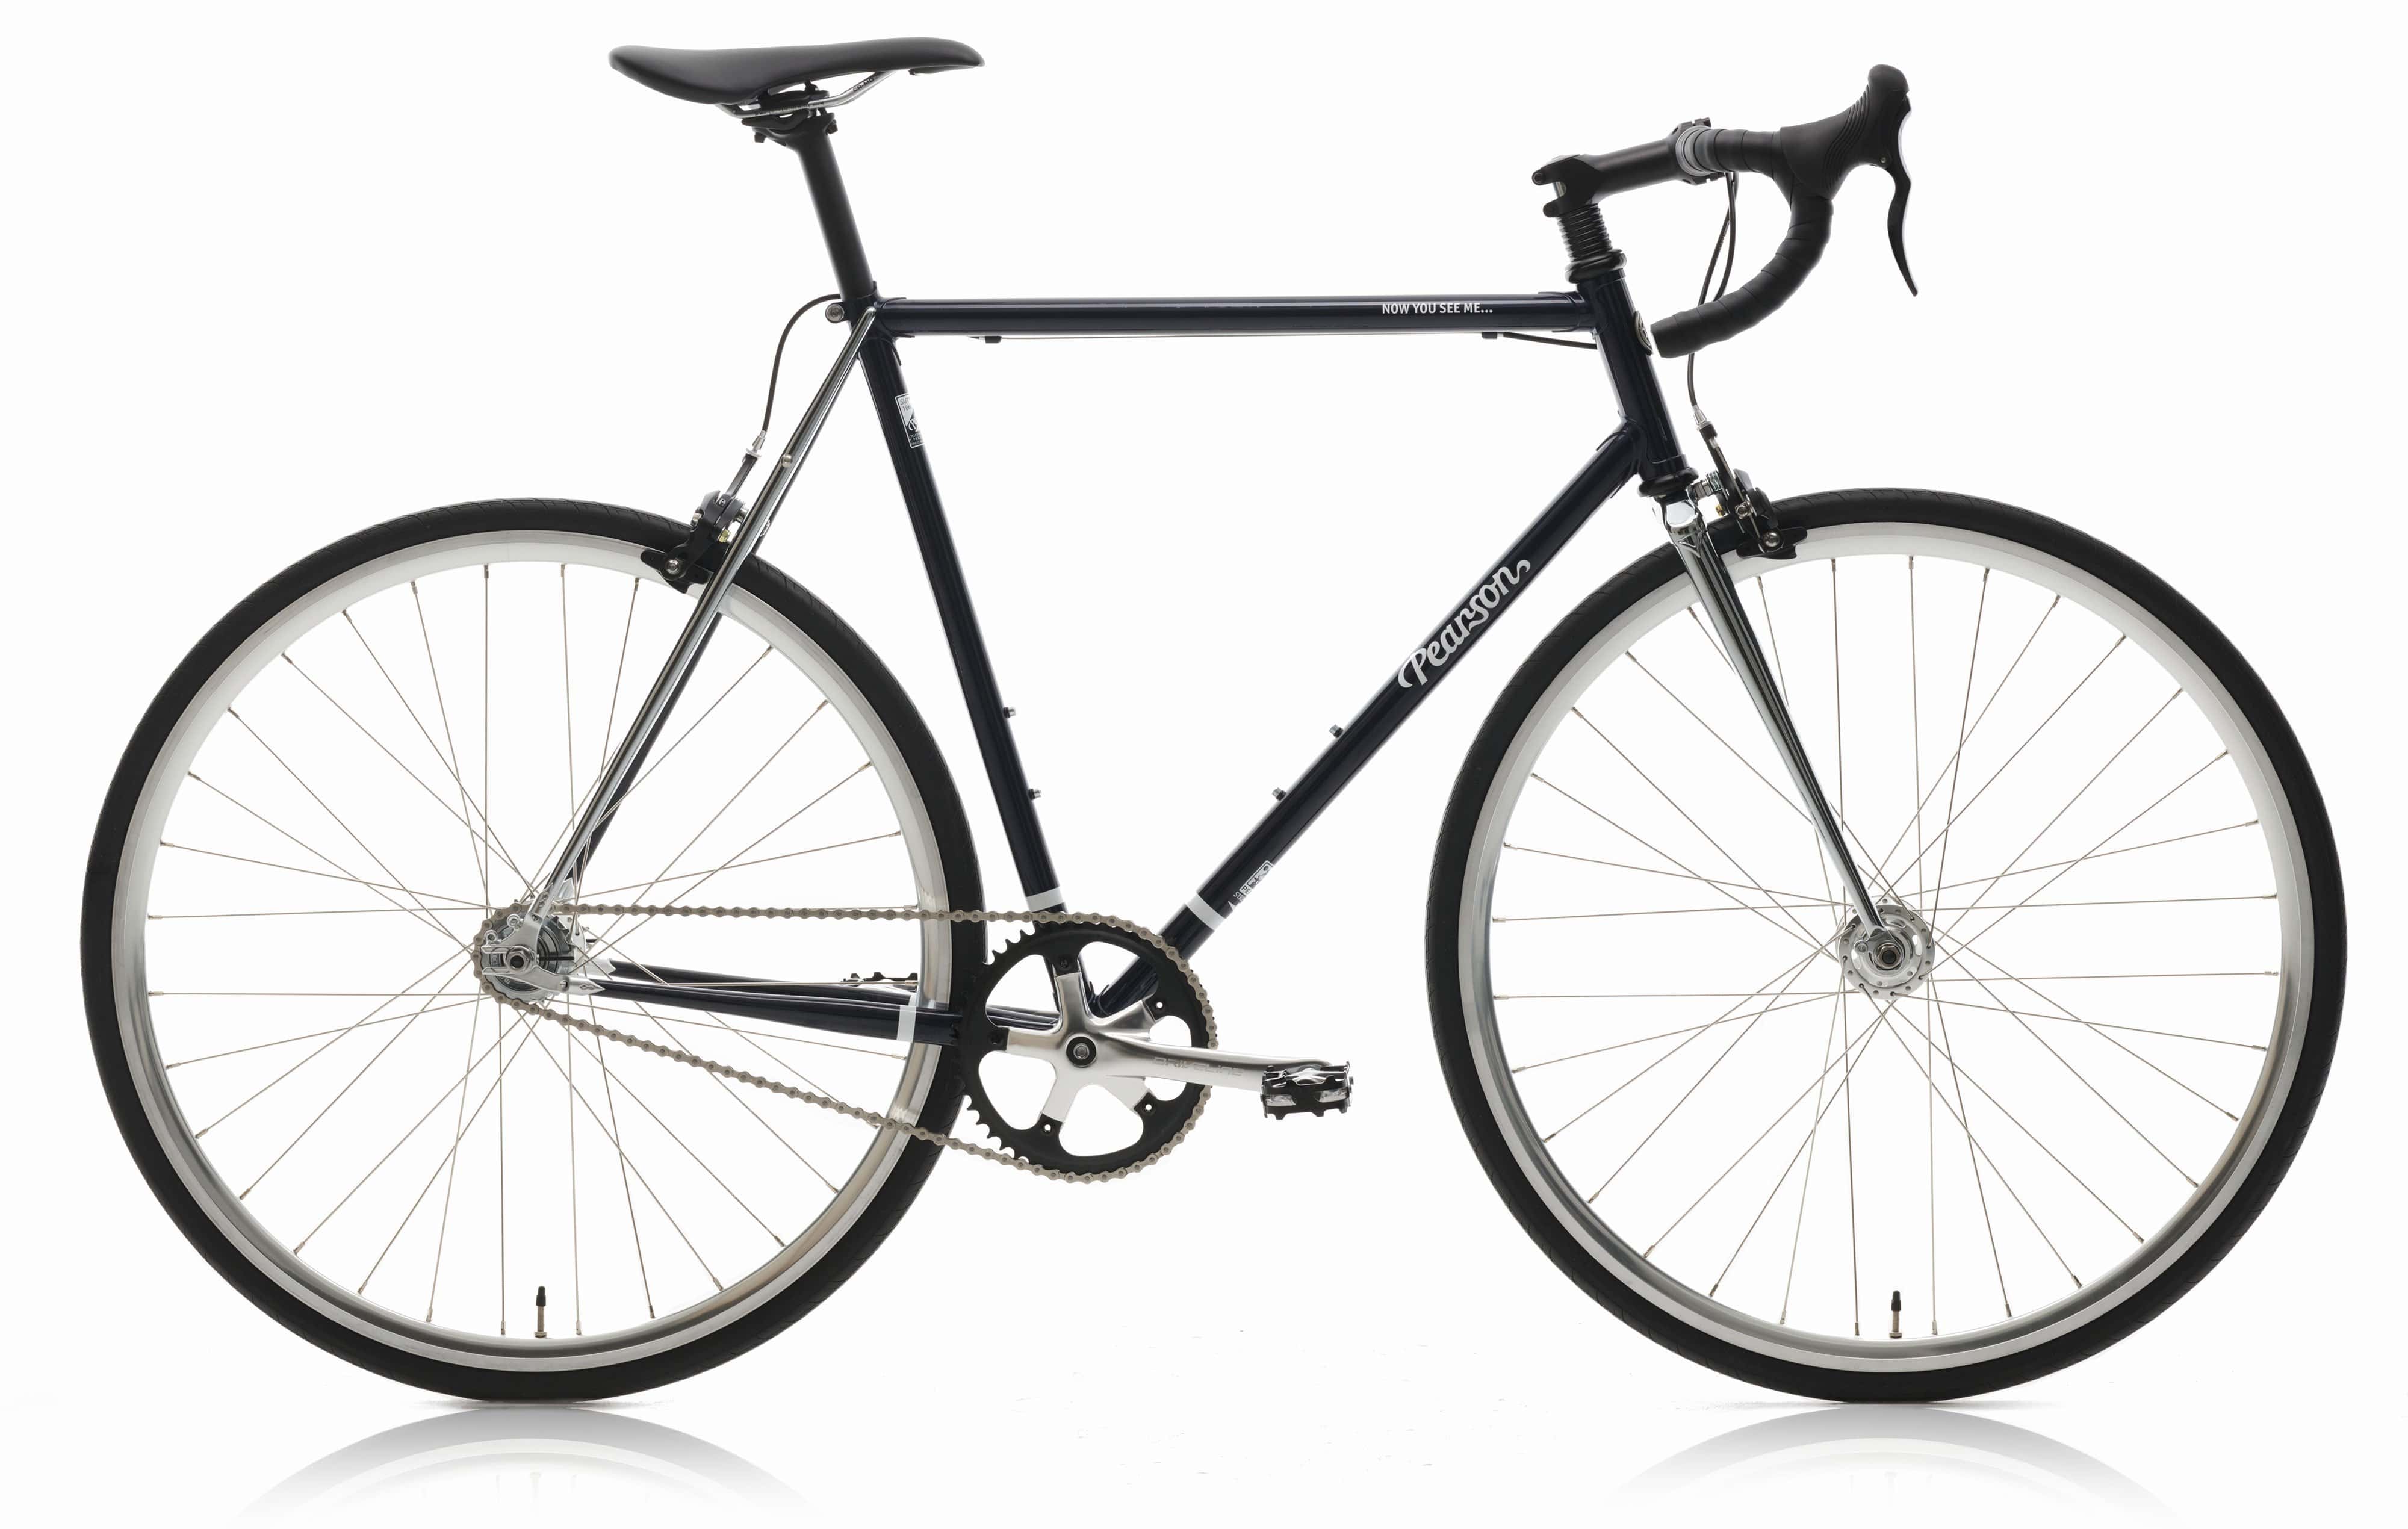 Pcs  Now You See Me - Steel Single Speed Bike  Continental Gator Hardshell 28mm / Without Mudguards / Medium